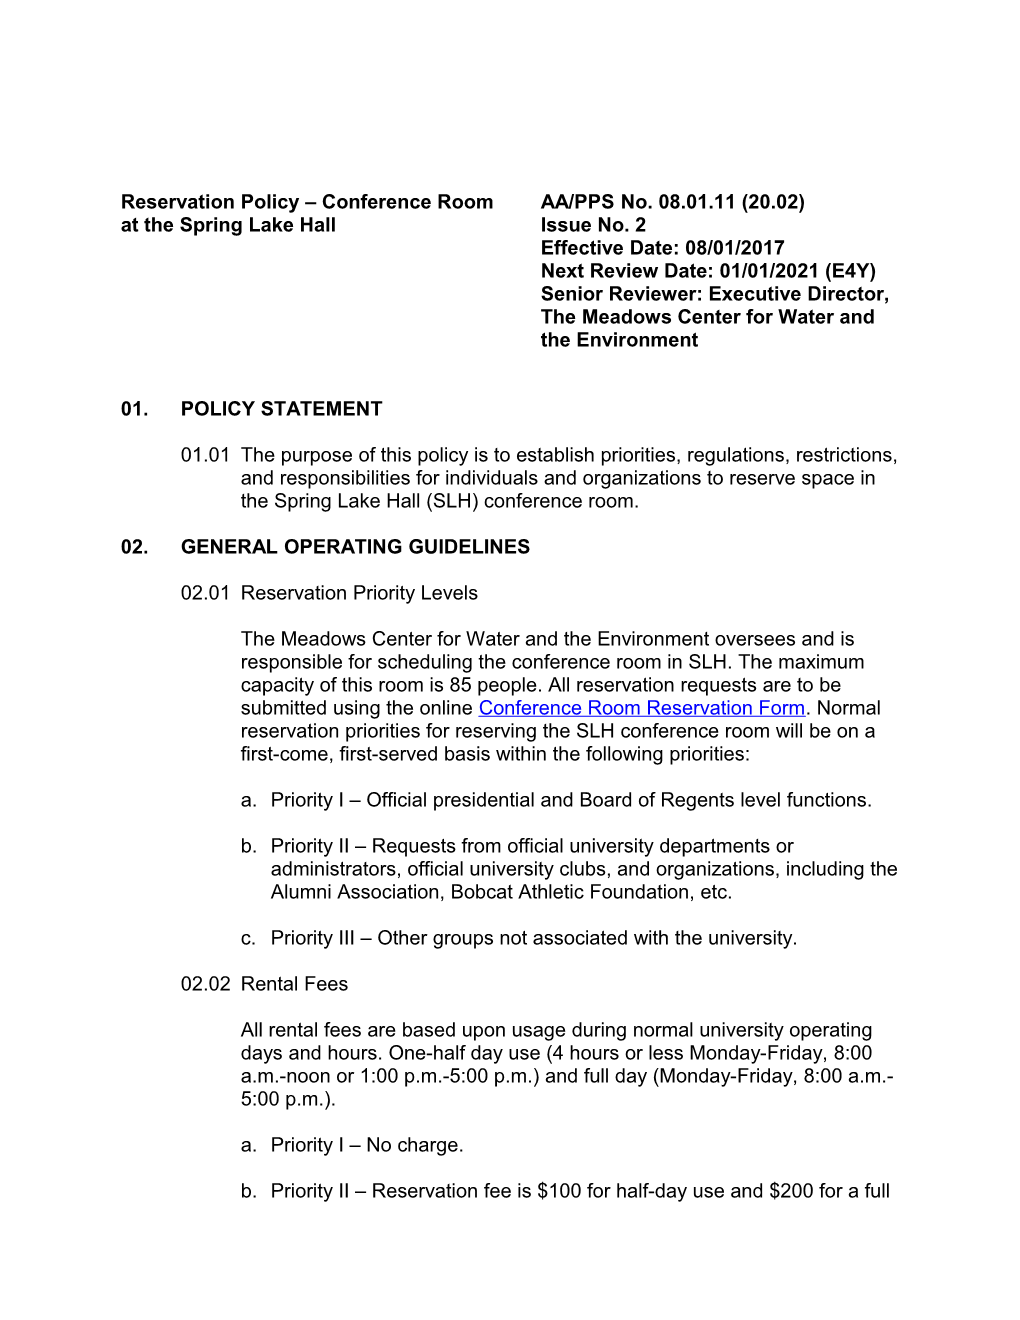 Reservation Policy Conference Roomaa/PPS No. 08.01.11 (20.02)